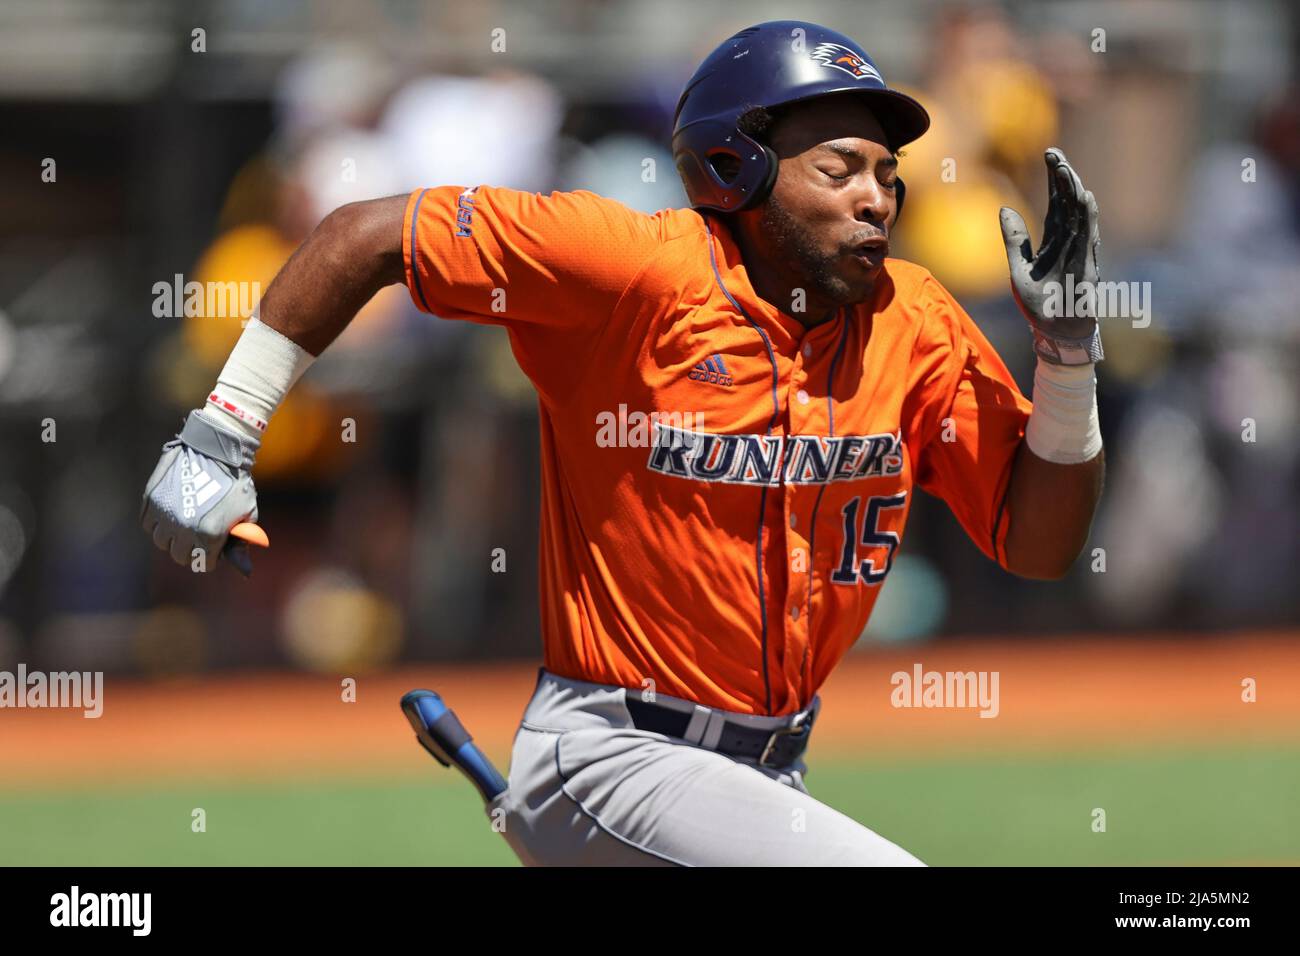 May 27, 2022: UTSA outfielder Ian Bailey (15) hustles down the first base line during a college baseball game, between Southern Miss and UTSA at the Conference USA Baseball Championships at Pete Taylor Park, Hattiesburg, Mississippi. Bobby McDuffie/CSM Credit: Cal Sport Media/Alamy Live News Stock Photo